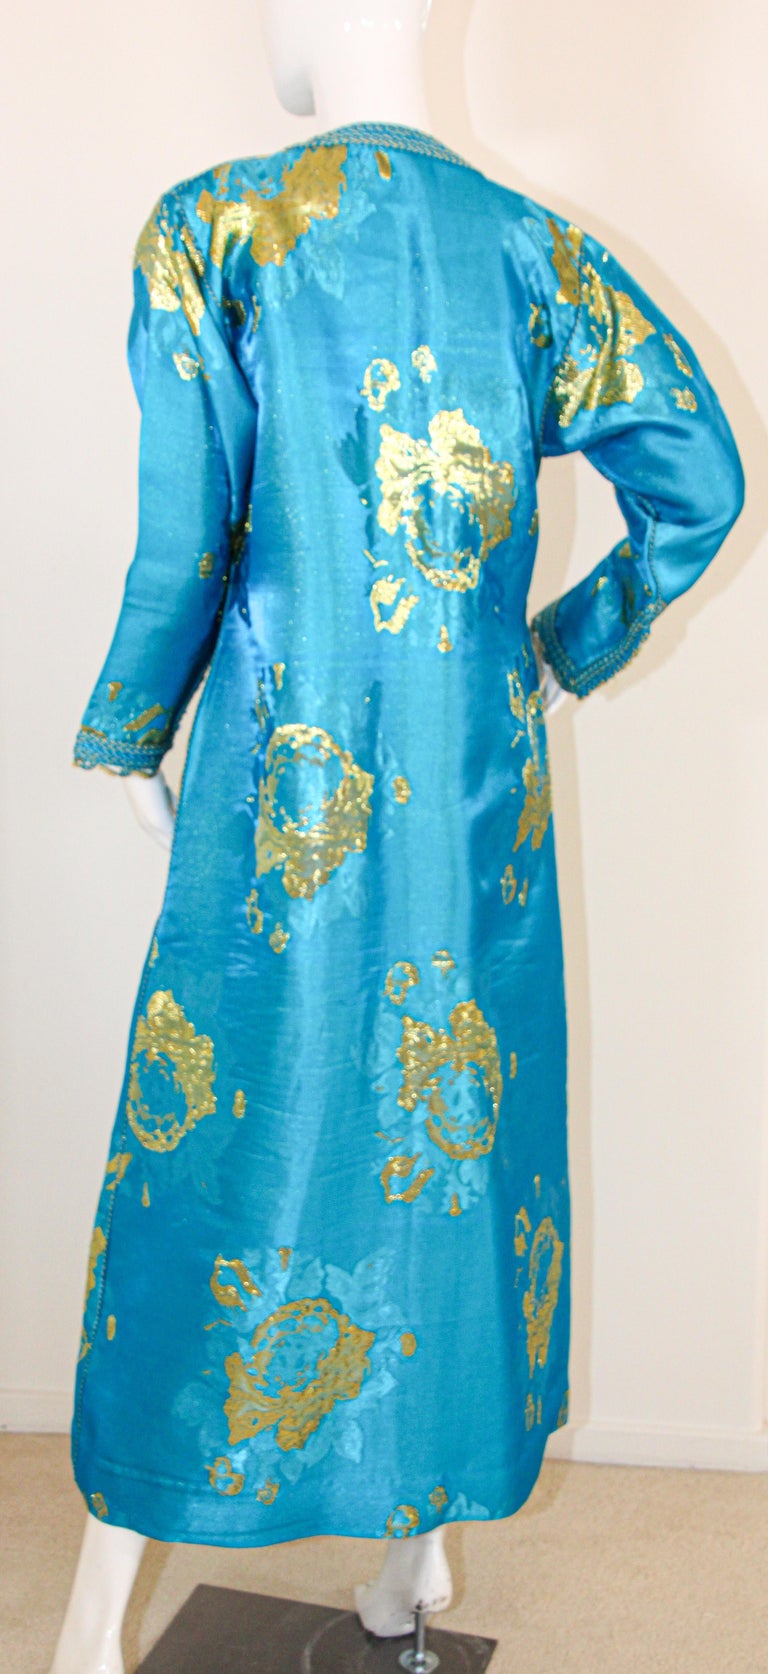 Moroccan Kaftan in Turquoise and Gold Floral Brocade Metallic Lame For Sale 6